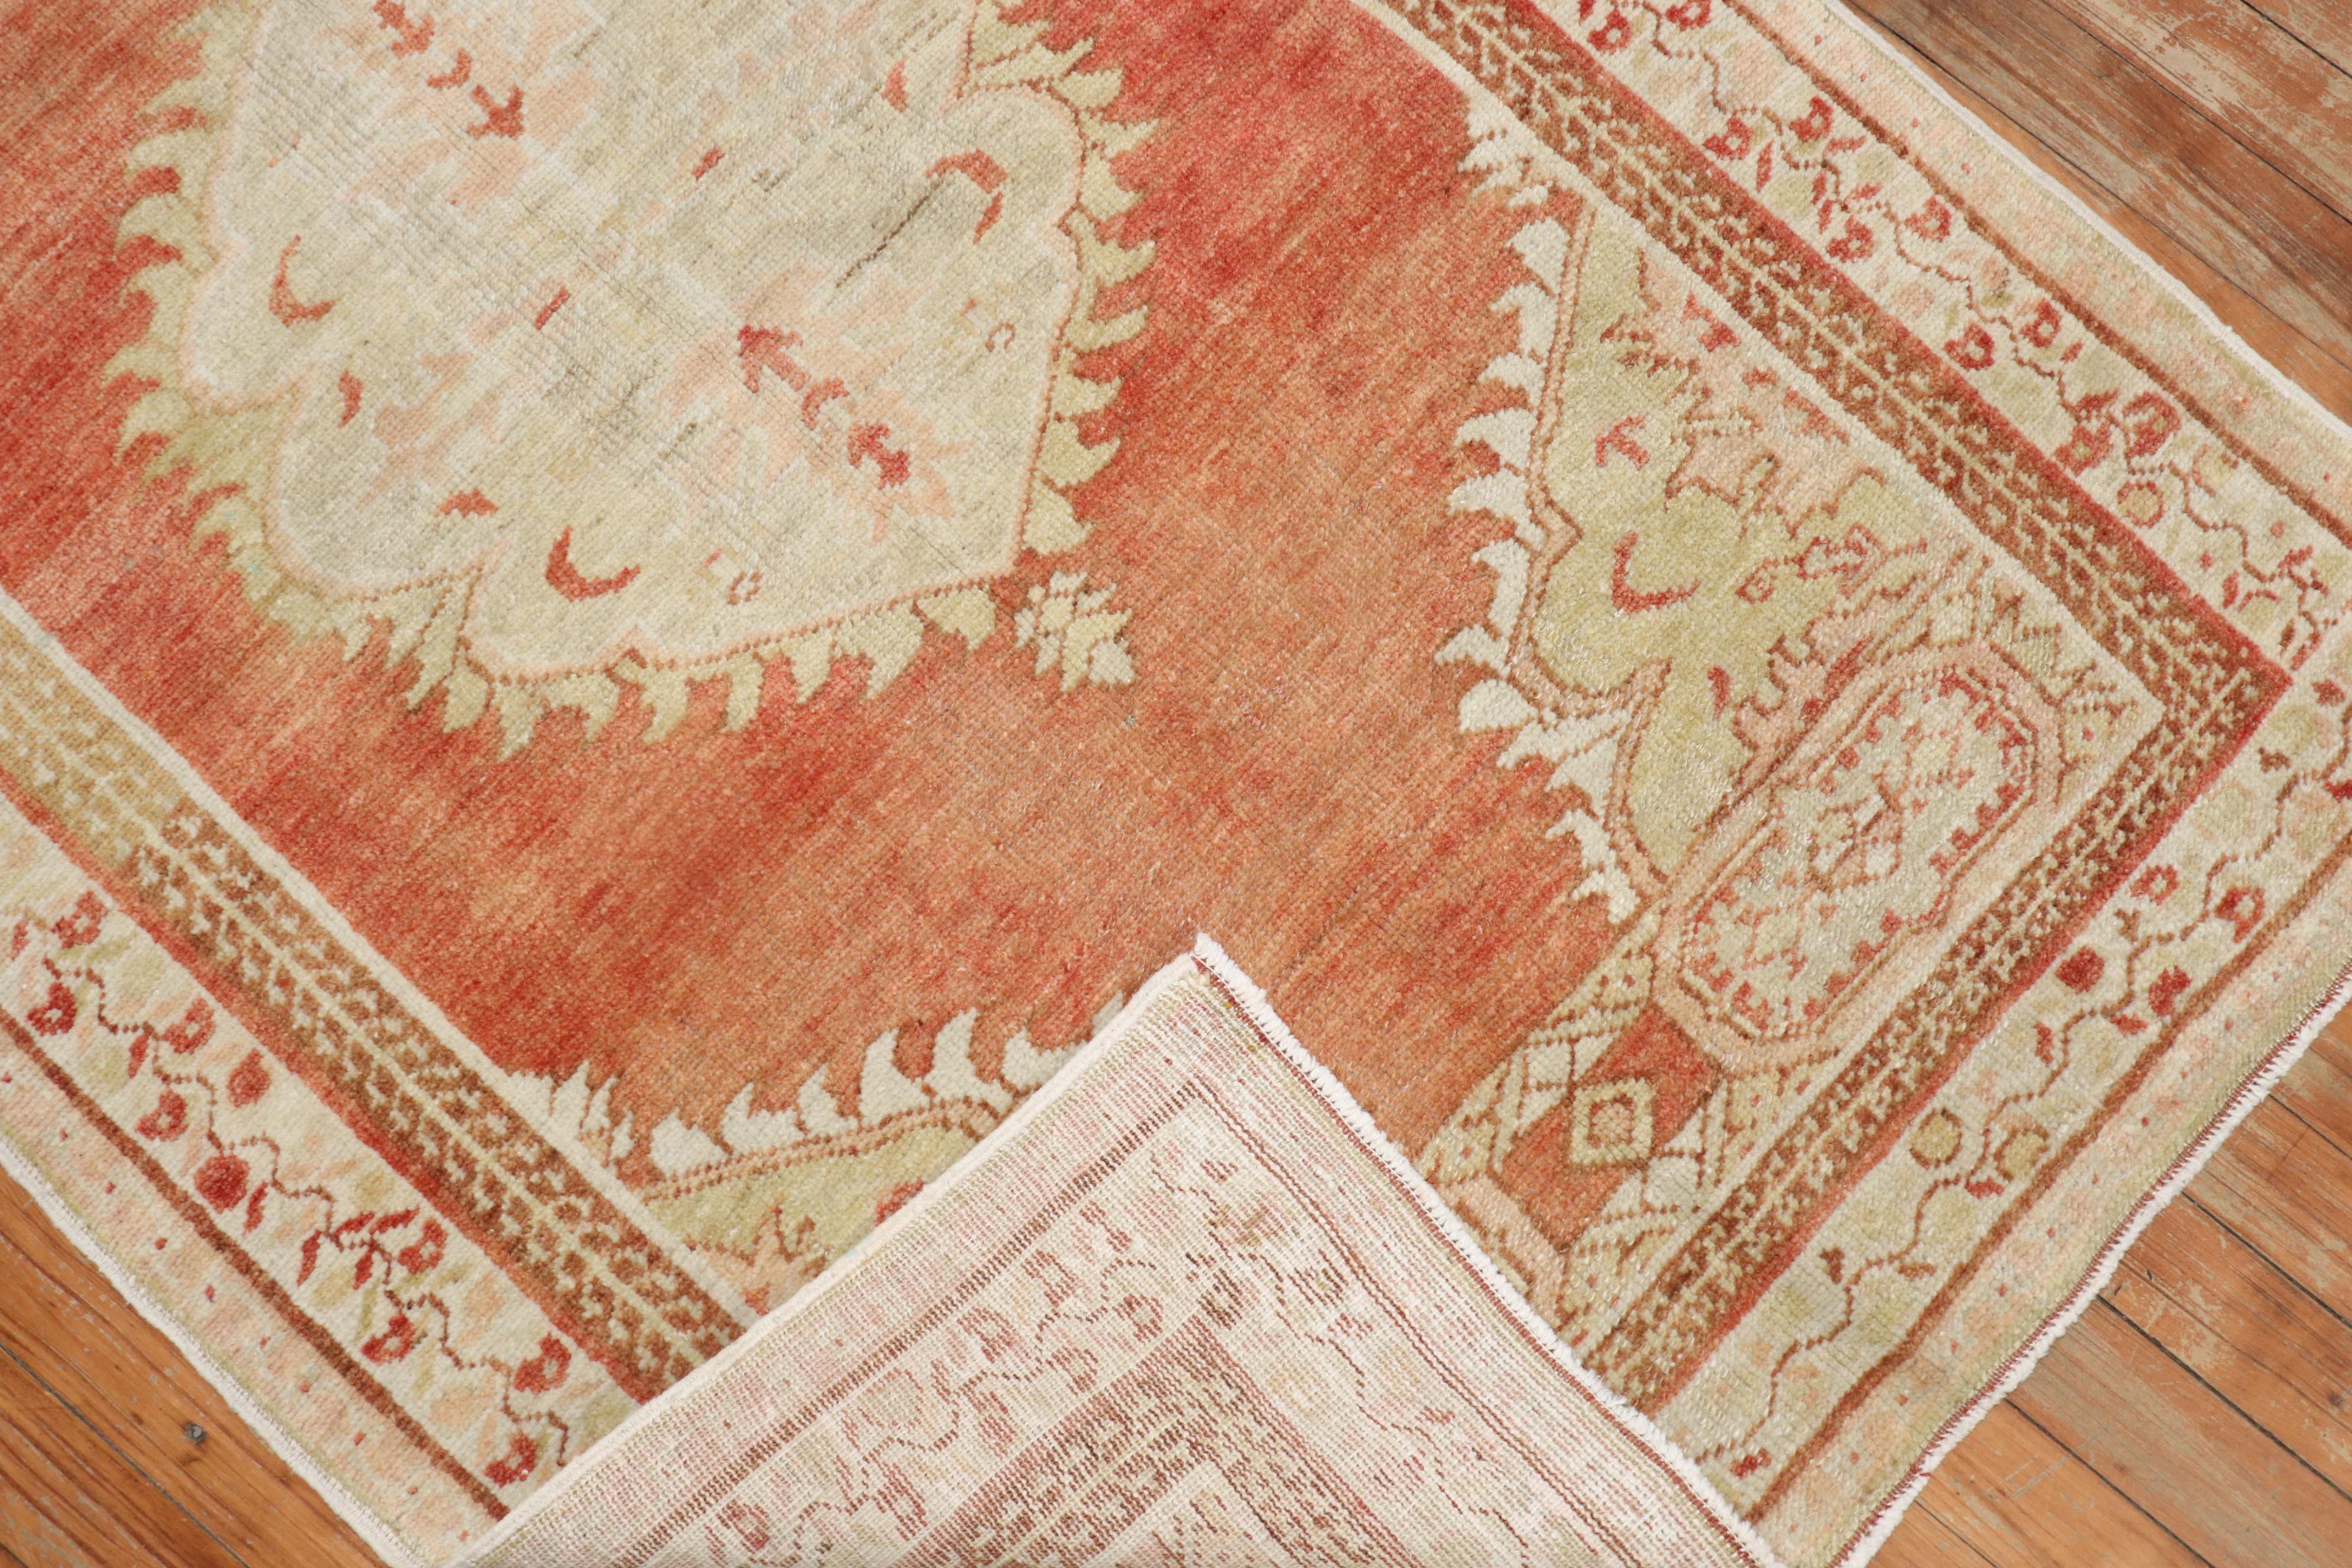 Scatter size Turkish rug from the 2nd quarter of the 20th century

Measures: 3'1'' x 5'.